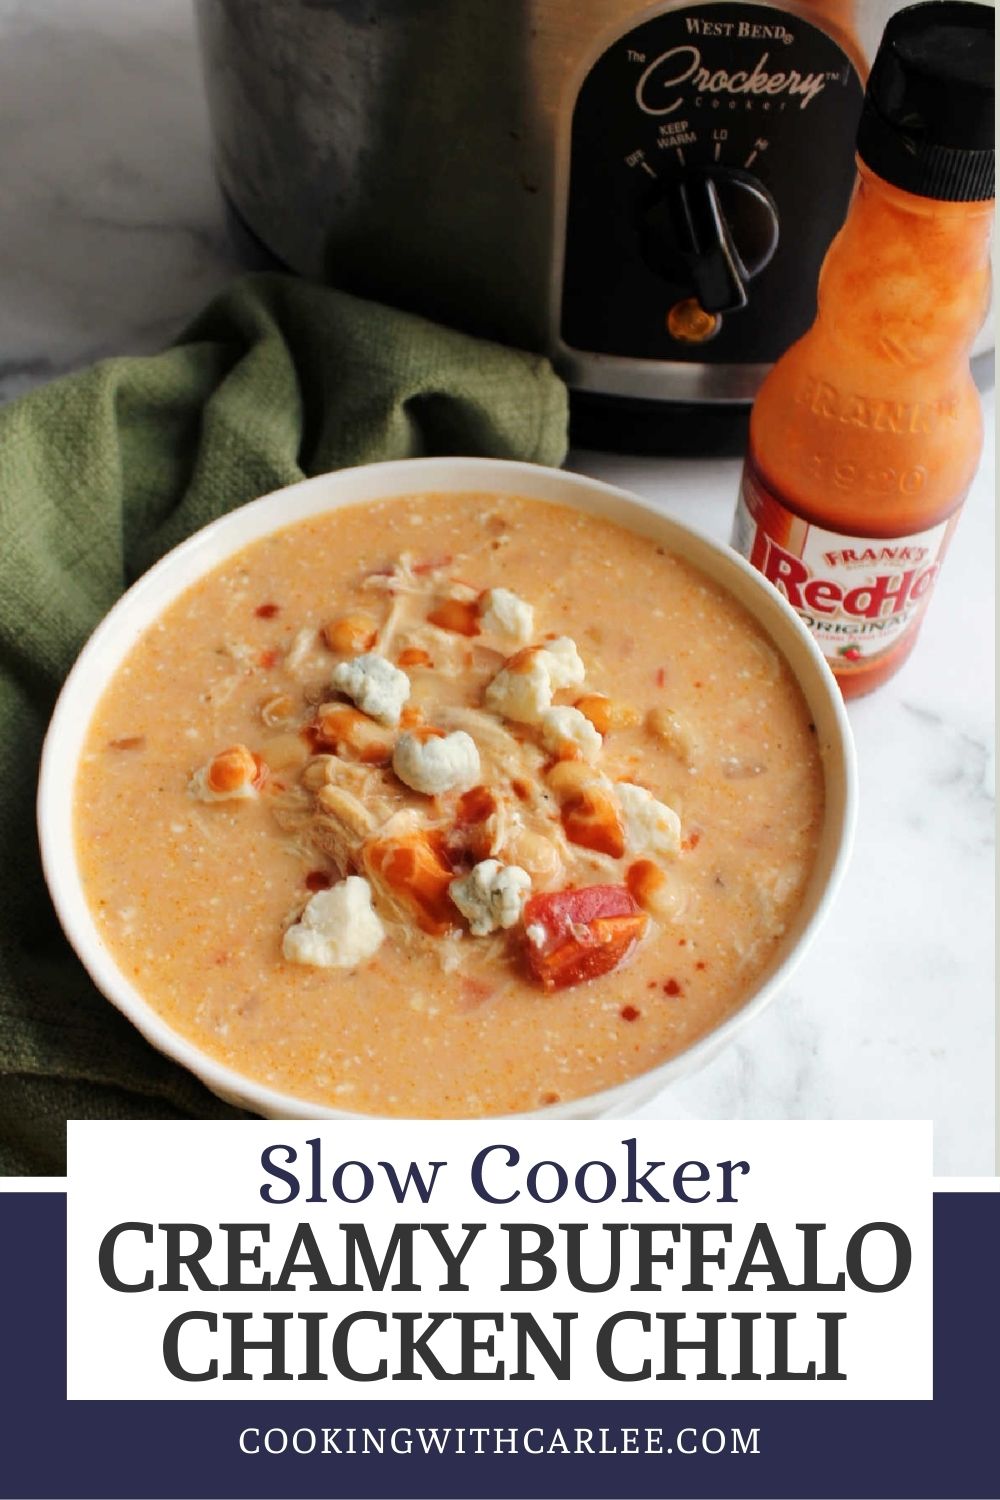 Creamy buffalo chicken chili is super simple to make with the help of your slow cooker. So it can cook all day while you do other things. It has just the right amount of buffalo chicken spice making it perfect for a weeknight dinner or a game day tailgating staple.